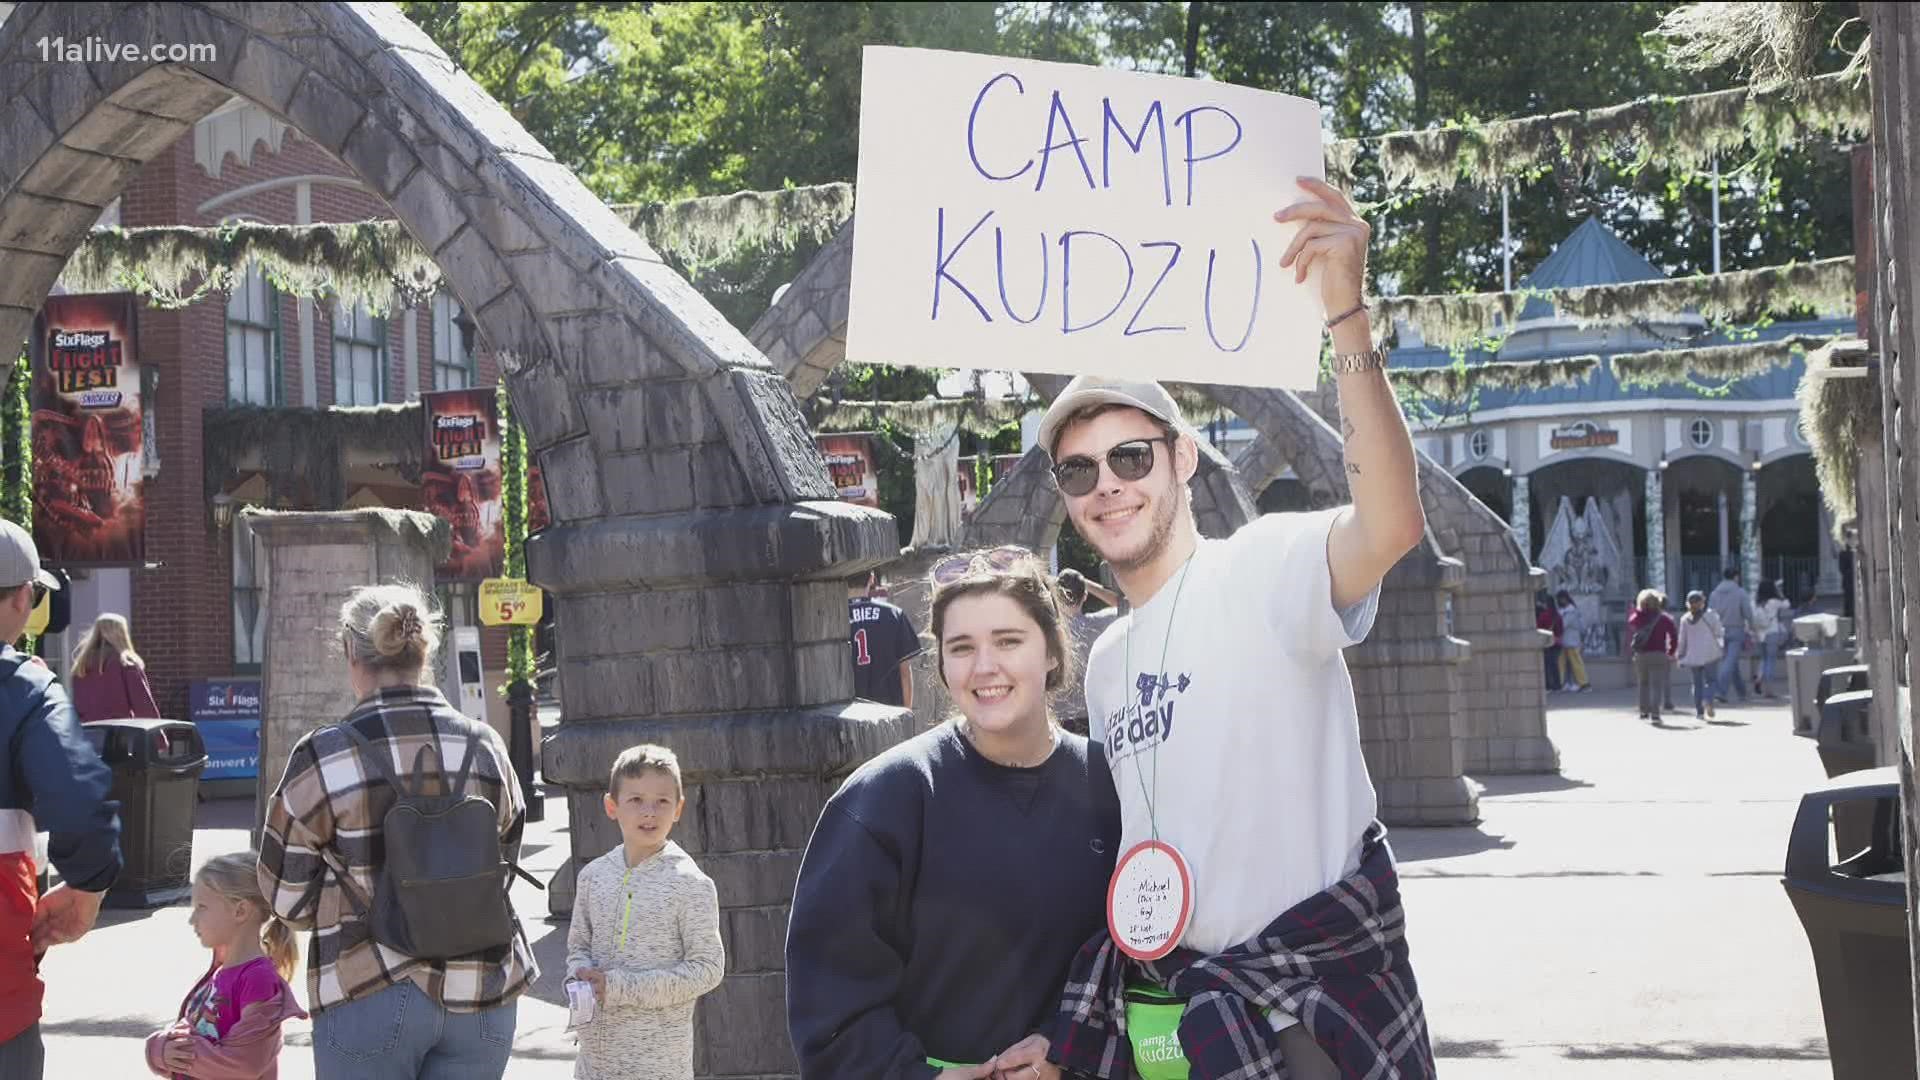 Just days ago, Camp Kudzu put on an event at Six Flags bringing kids with type 1 diabetes together.